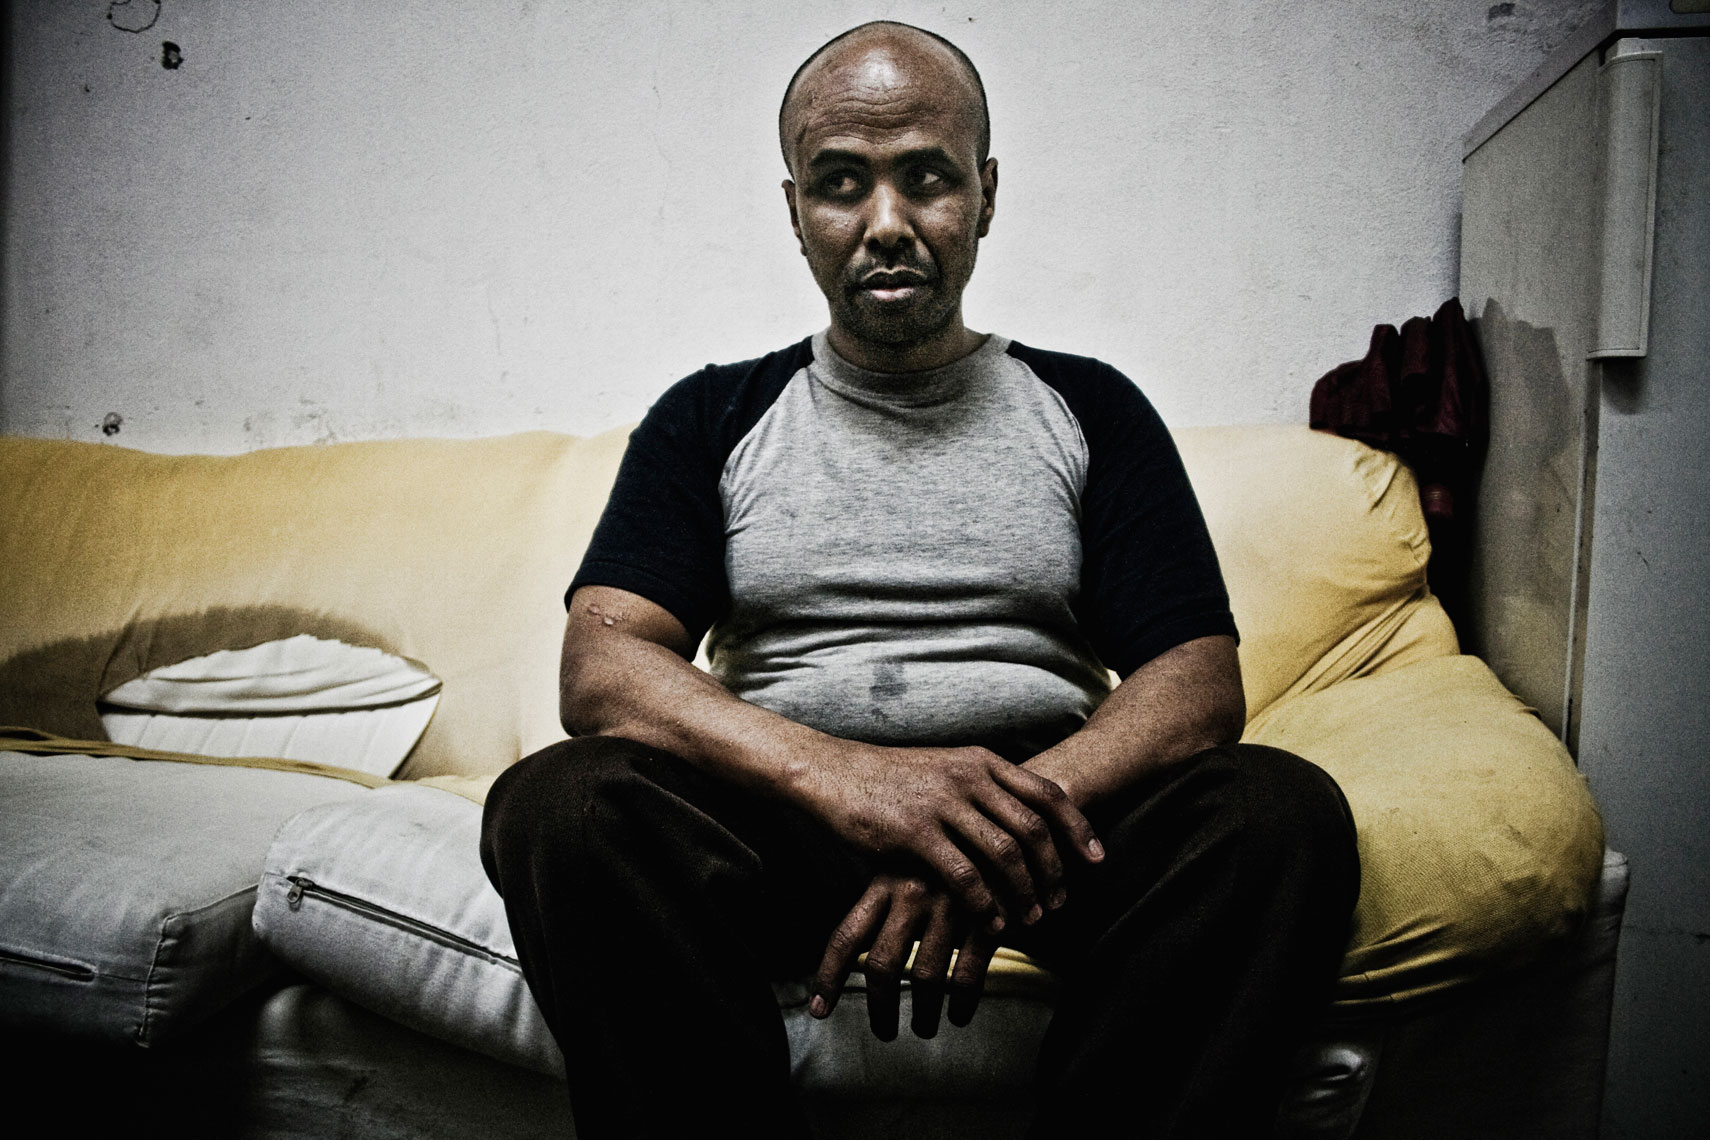 ITALY. Florence, 11th May 2010. A Somali refugee sits inside the "Kulanka" building, a former warehouse near the railways, occupied in 2008 by a group of Somali refugees with the support of an association that helps people without an house to live in. In 2009, according to a deal signed with the city mayor, the building has been loan for free temporary use to an association of Somali refugees. "Kulanka" means assembly in Somali language.